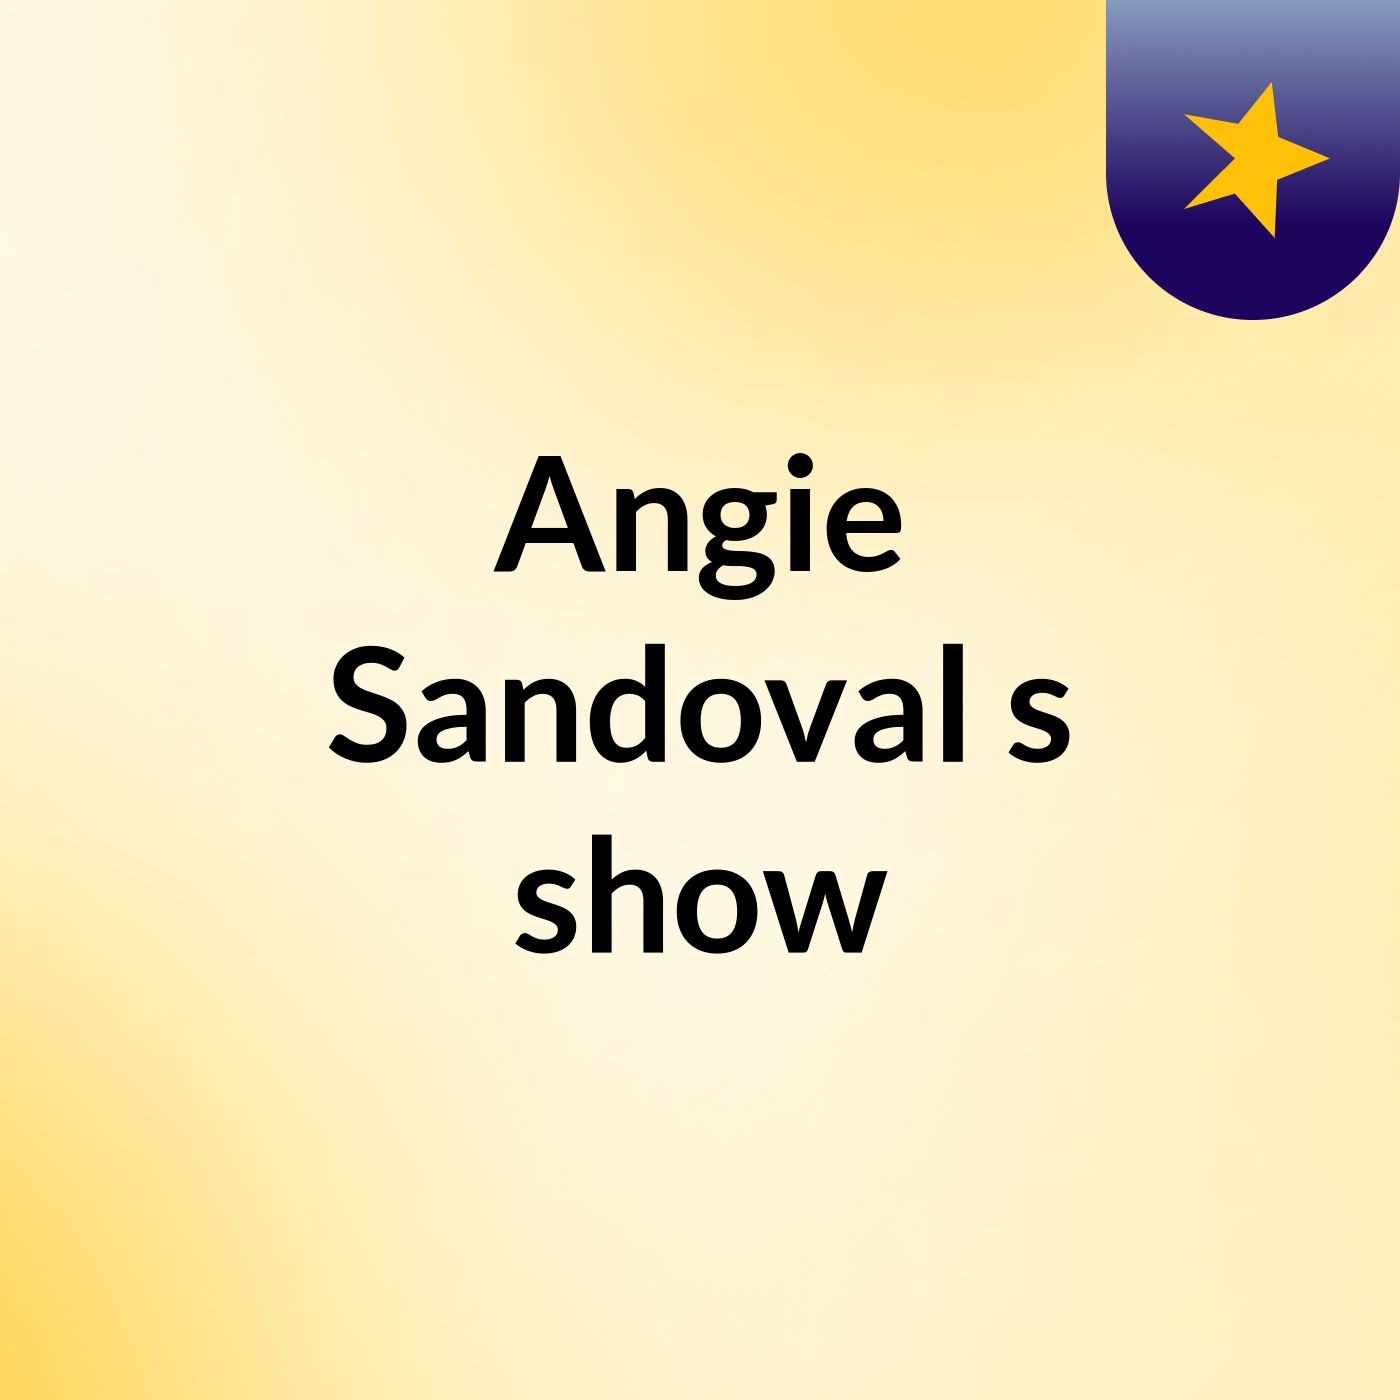 Angie Sandoval's show